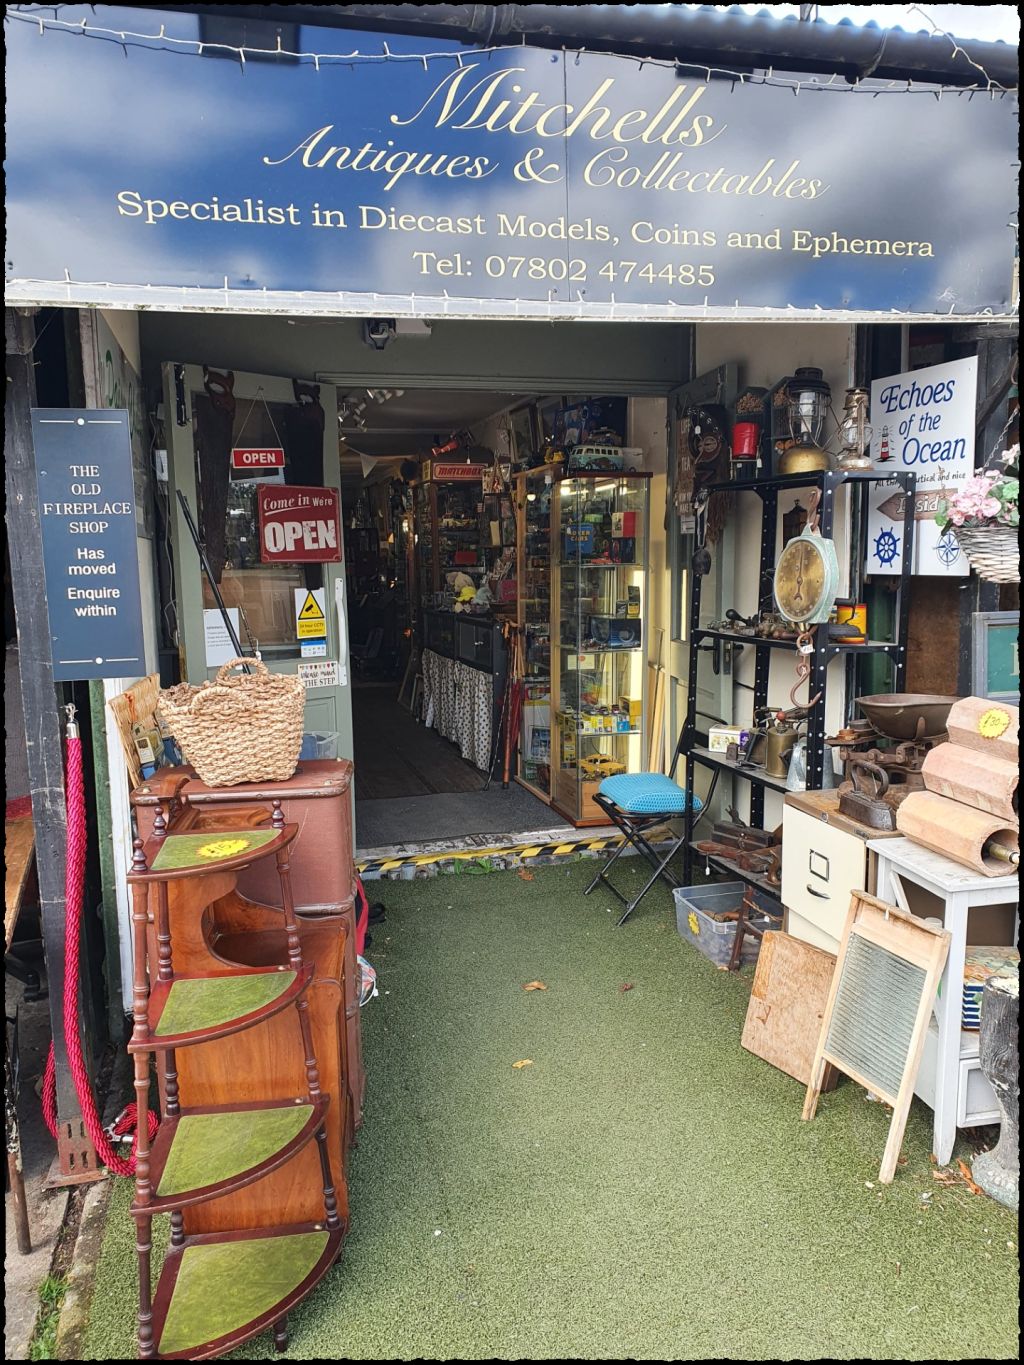 Mitchells Antiques & Collectables